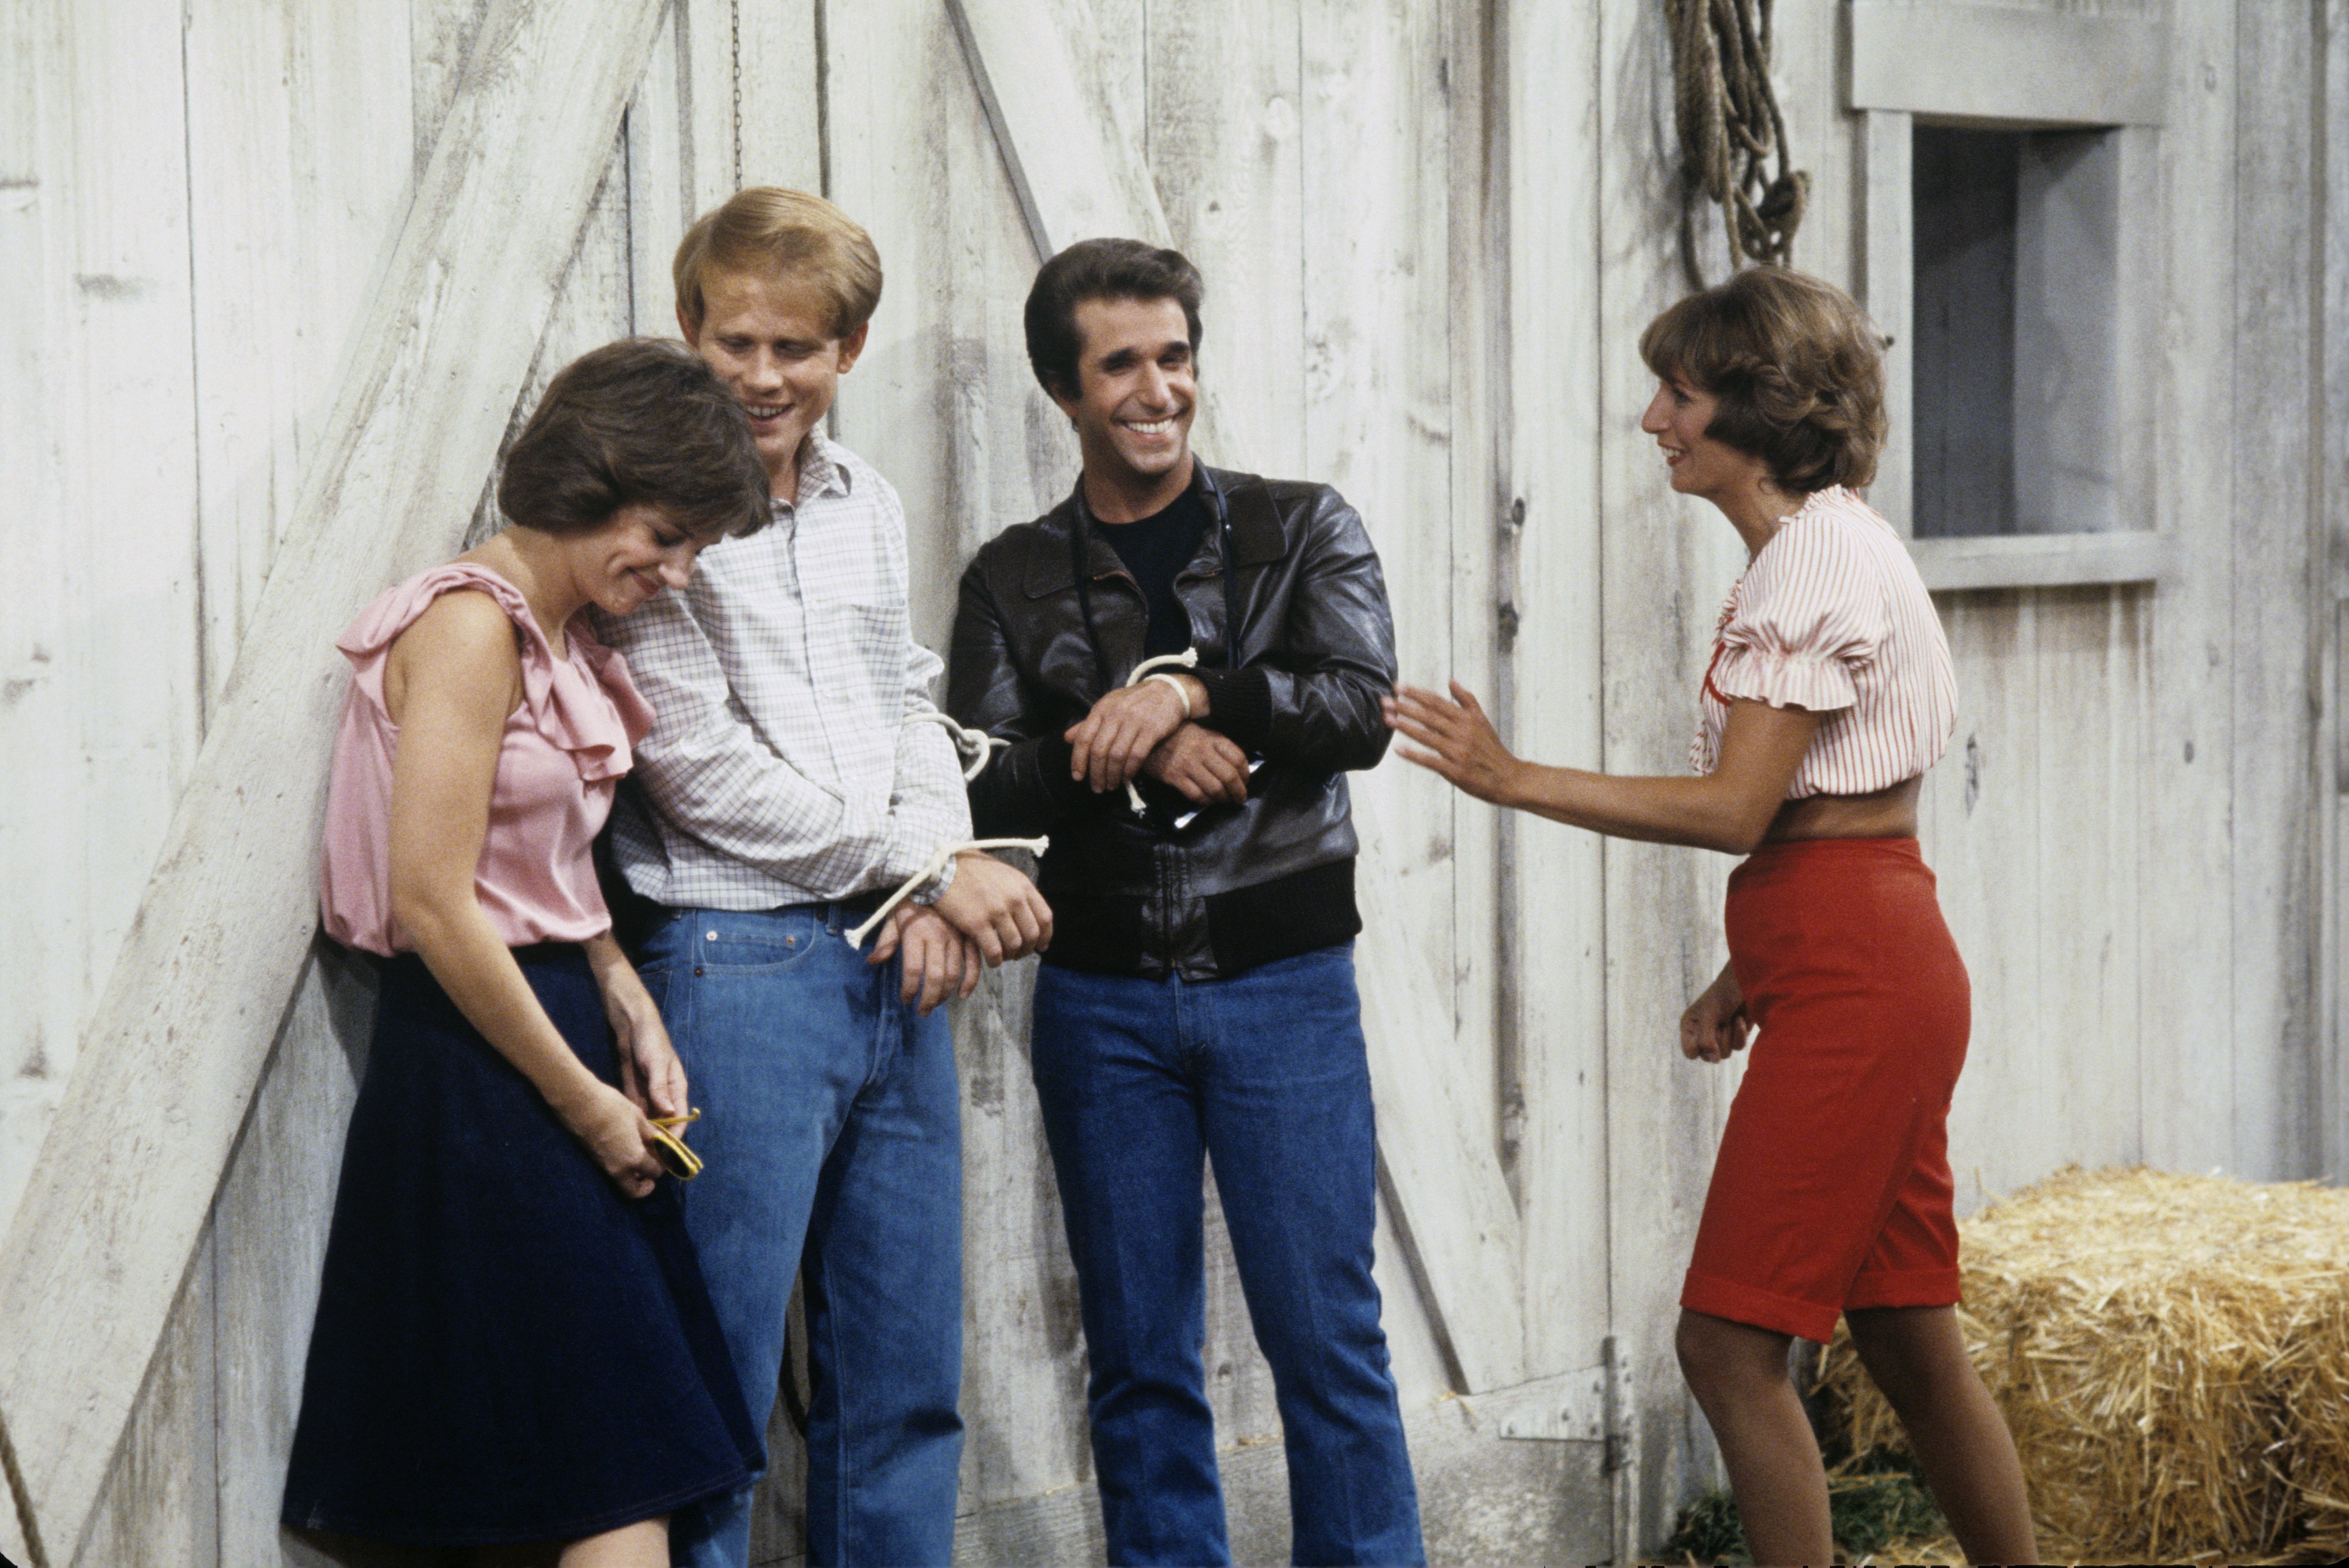 Cindy Williams, Ron Howard, Henry Winkler, Penny Marshall on "Laverne & Shirley," 1979 | Source: Getty Images